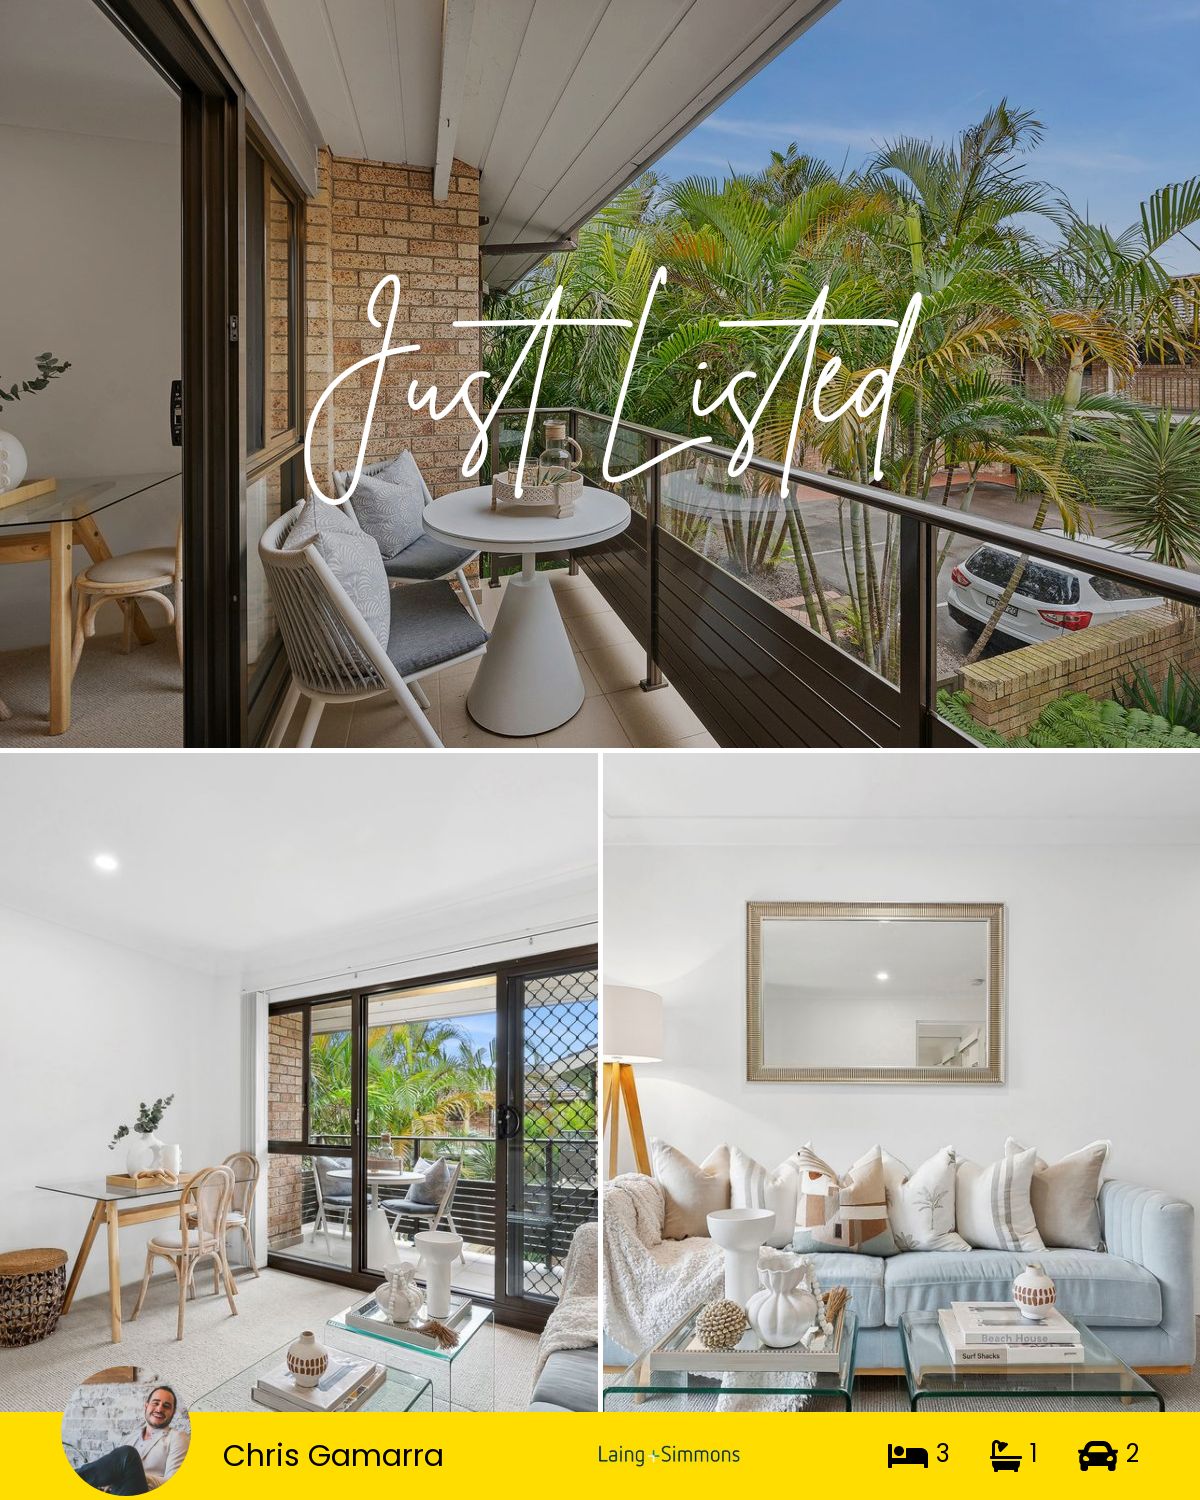 26/1259 Pittwater Road, Narrabeen, NSW 2101 | Realty.com.au